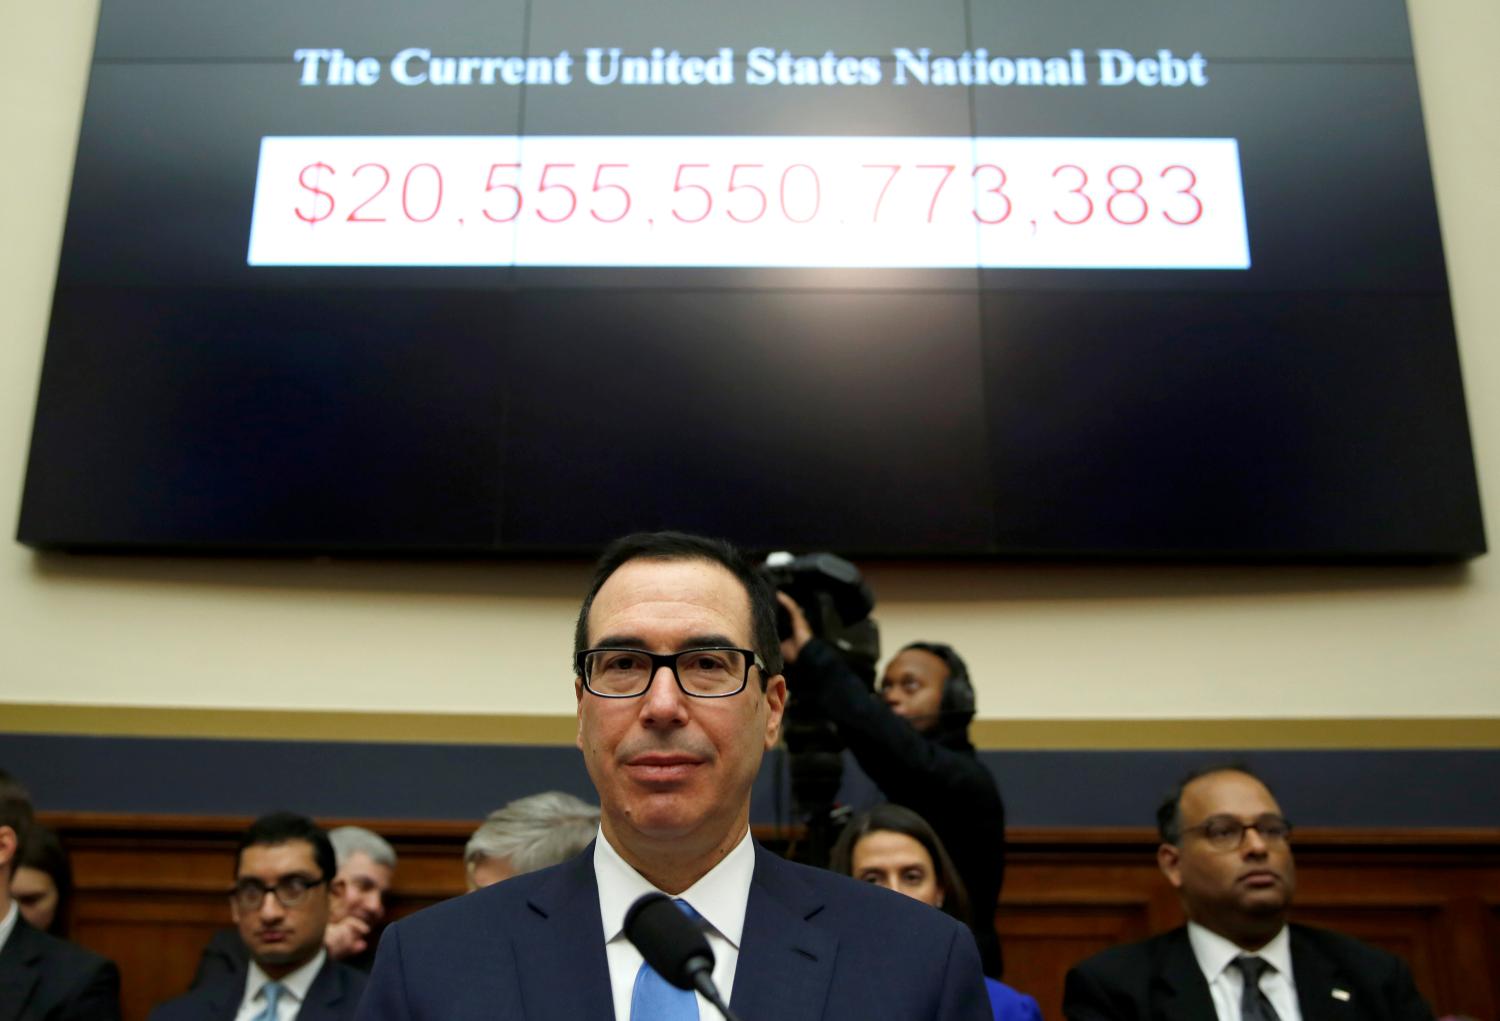 Treasury Secretary Steven Mnuchin sits under a display of the U.S. national debt as he testifies to the House Financial Services Committee on "The Annual Report of the Financial Stability Oversight Council" on Capitol Hill in Washington, U.S., February 6, 2018. REUTERS/Joshua Roberts - RC131089F510